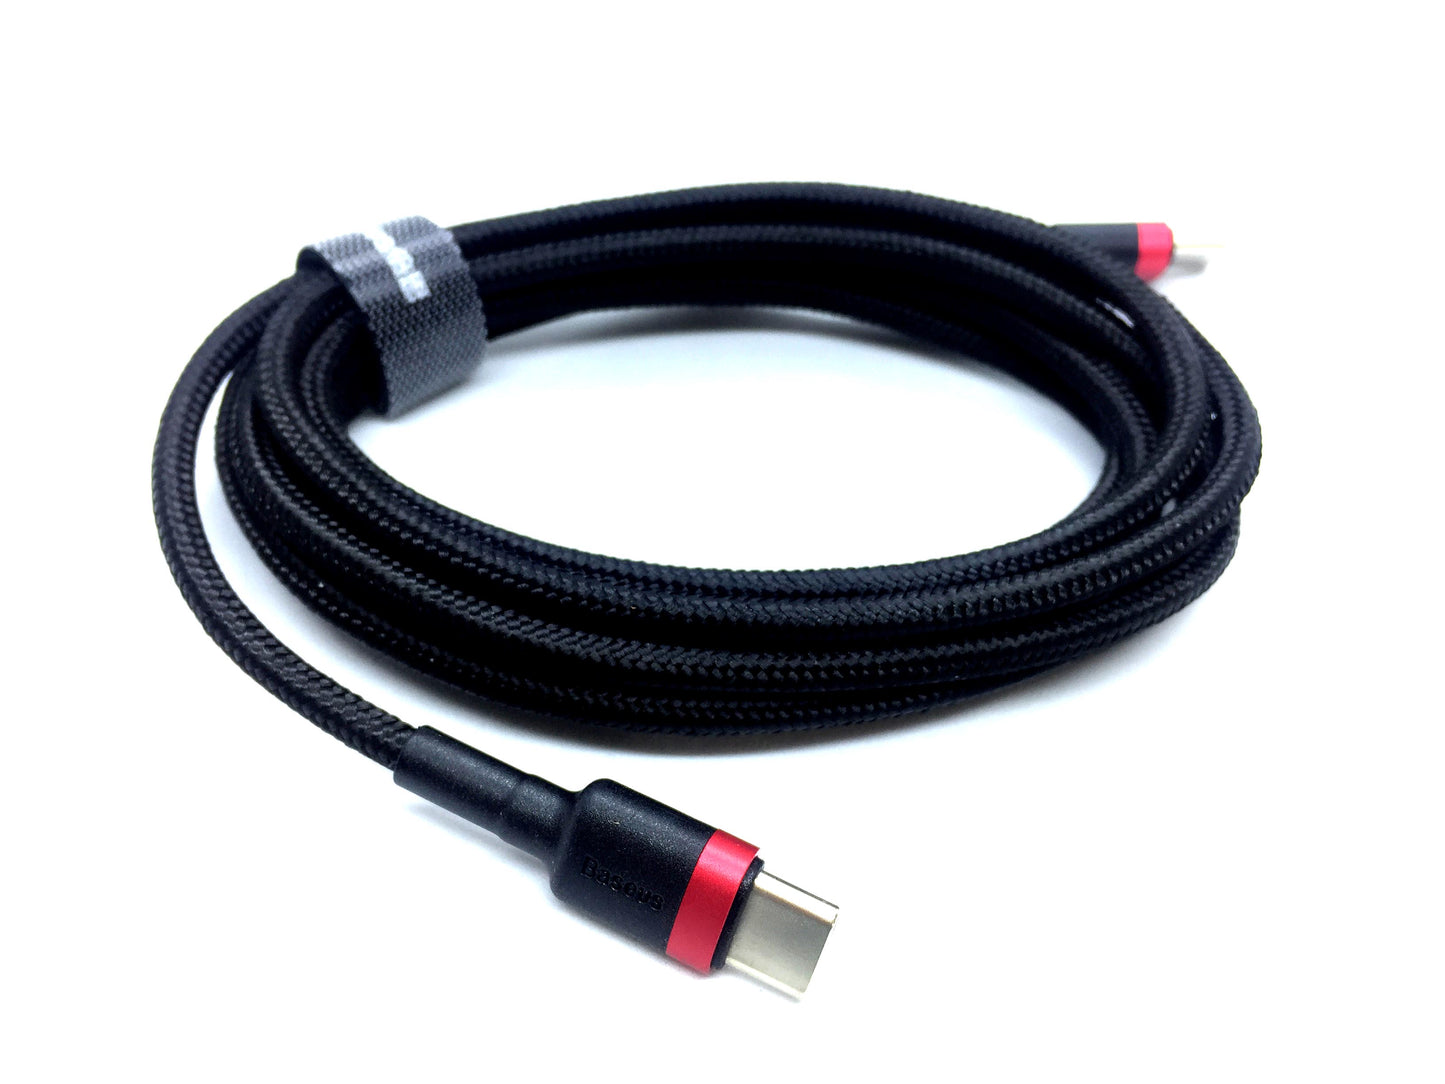 USB C to USB C Cable USB 3.0 20V 3A - 0.5 meter long